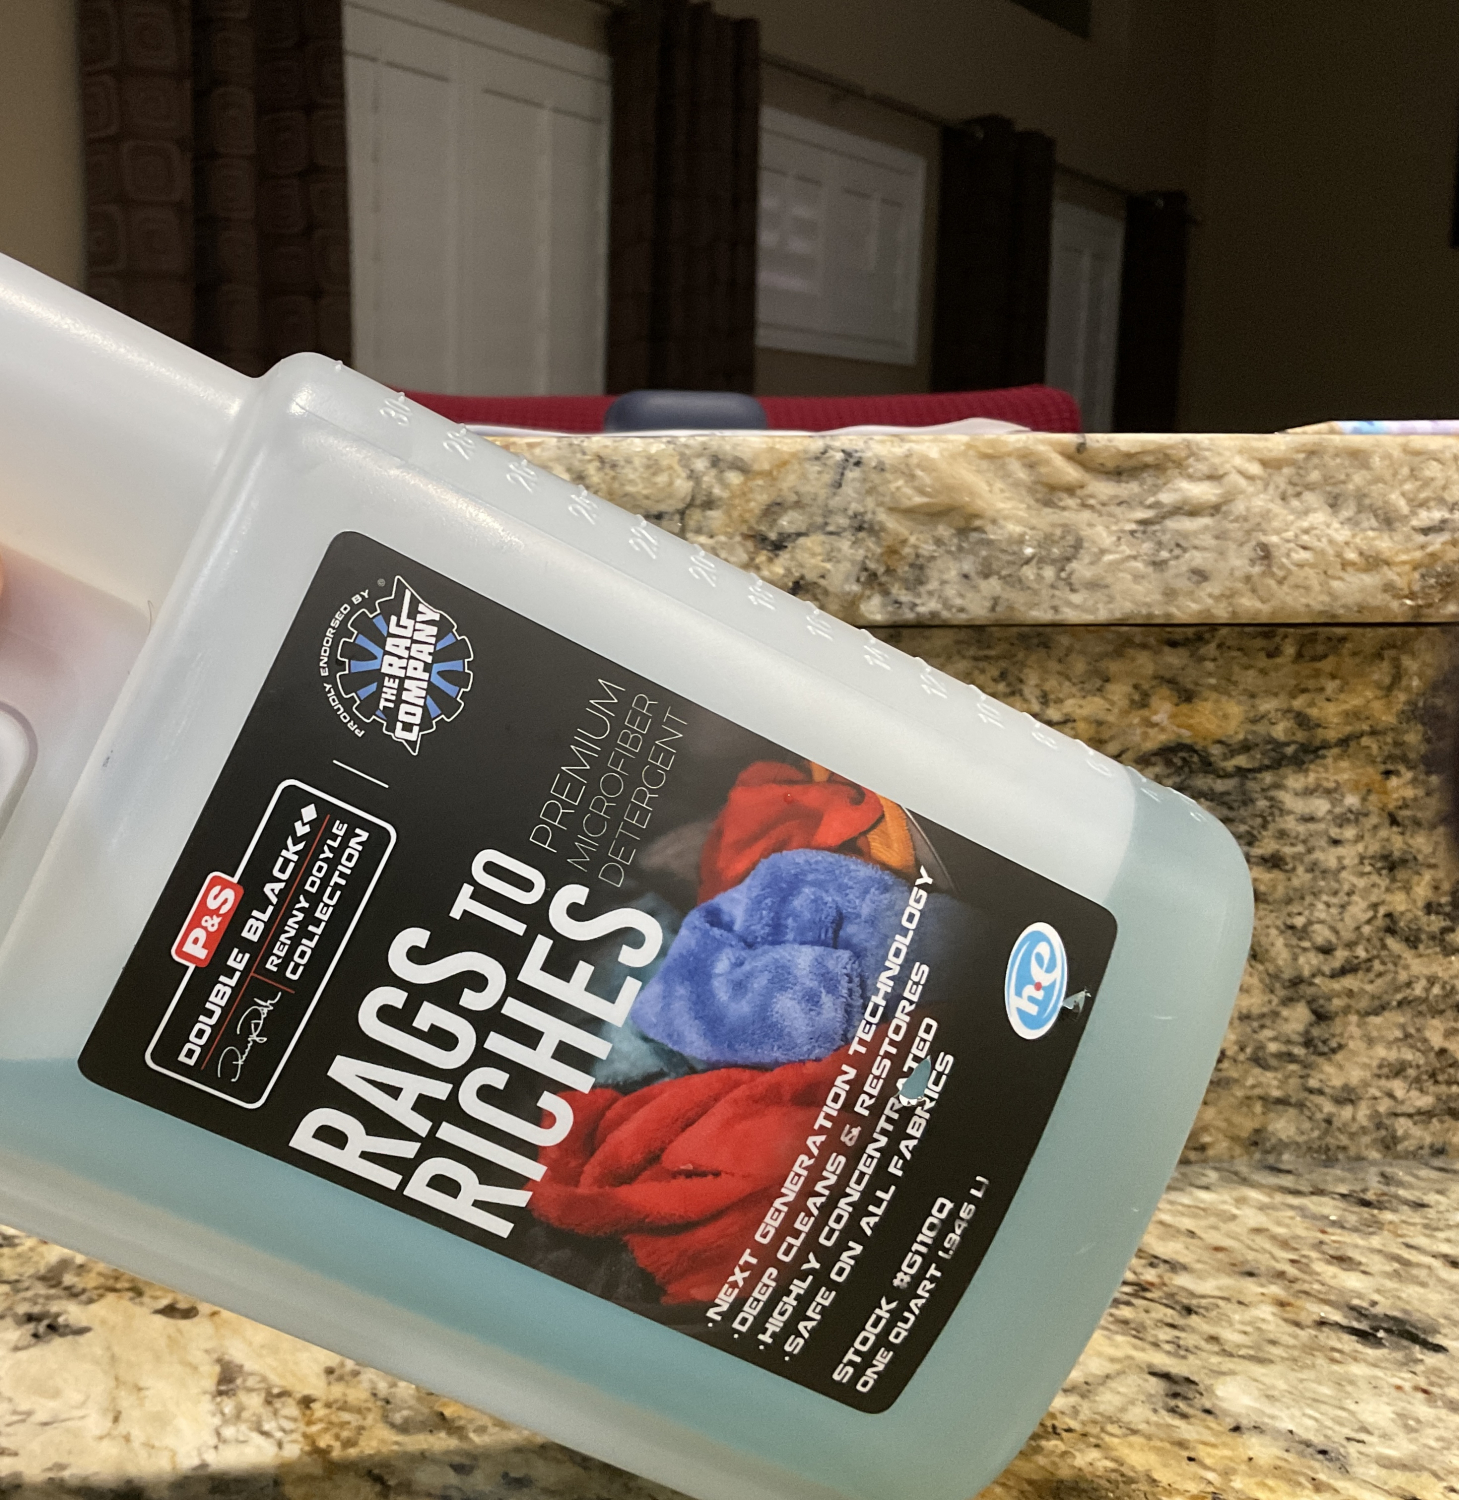 Willy's Garage - RAGS TO RICHES™ is the Next Generation of microfiber  detergents using new breakthroughs in cleaning technology. The advanced  formula deep cleans and restores absorbency and color to microfiber towels